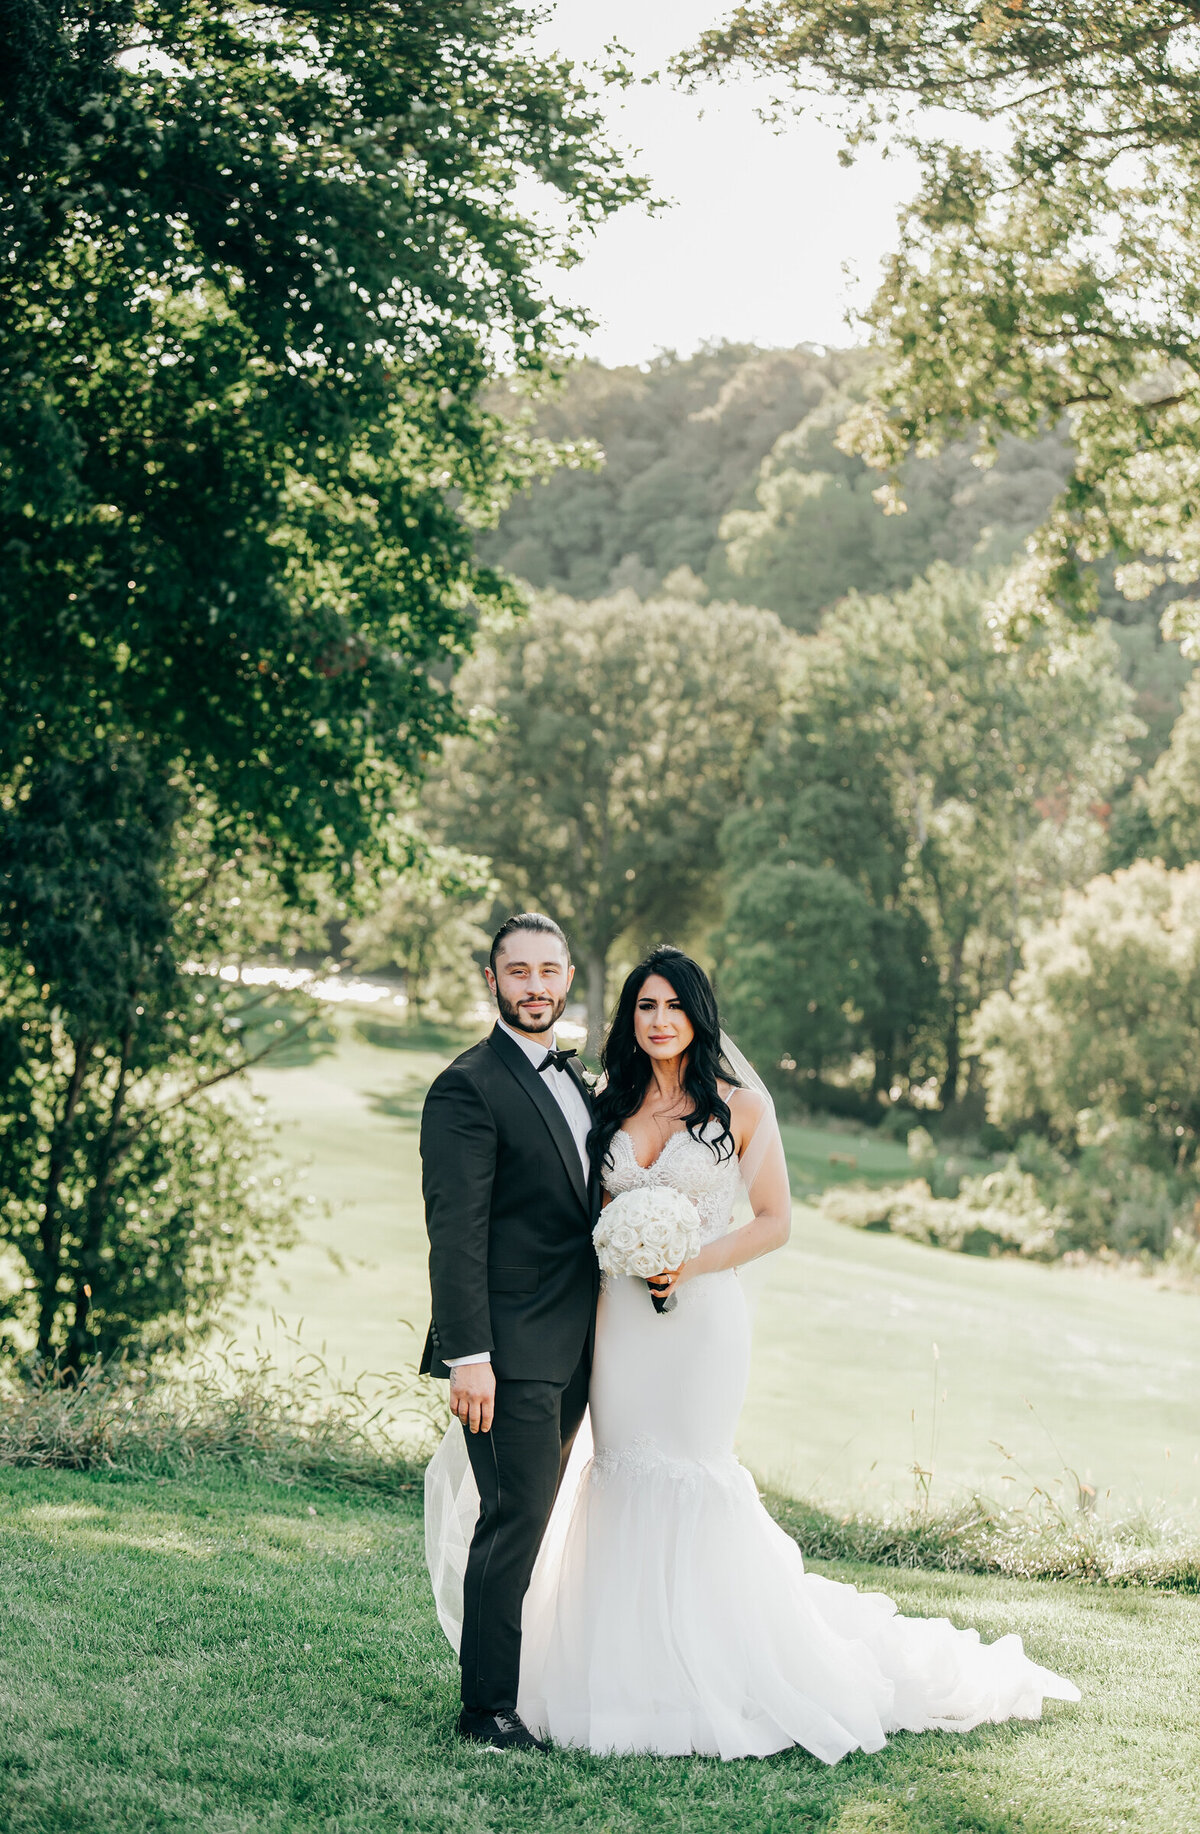 Elegant bride and groom posing for romantic photos on their Summer wedding day at London Hunt Club